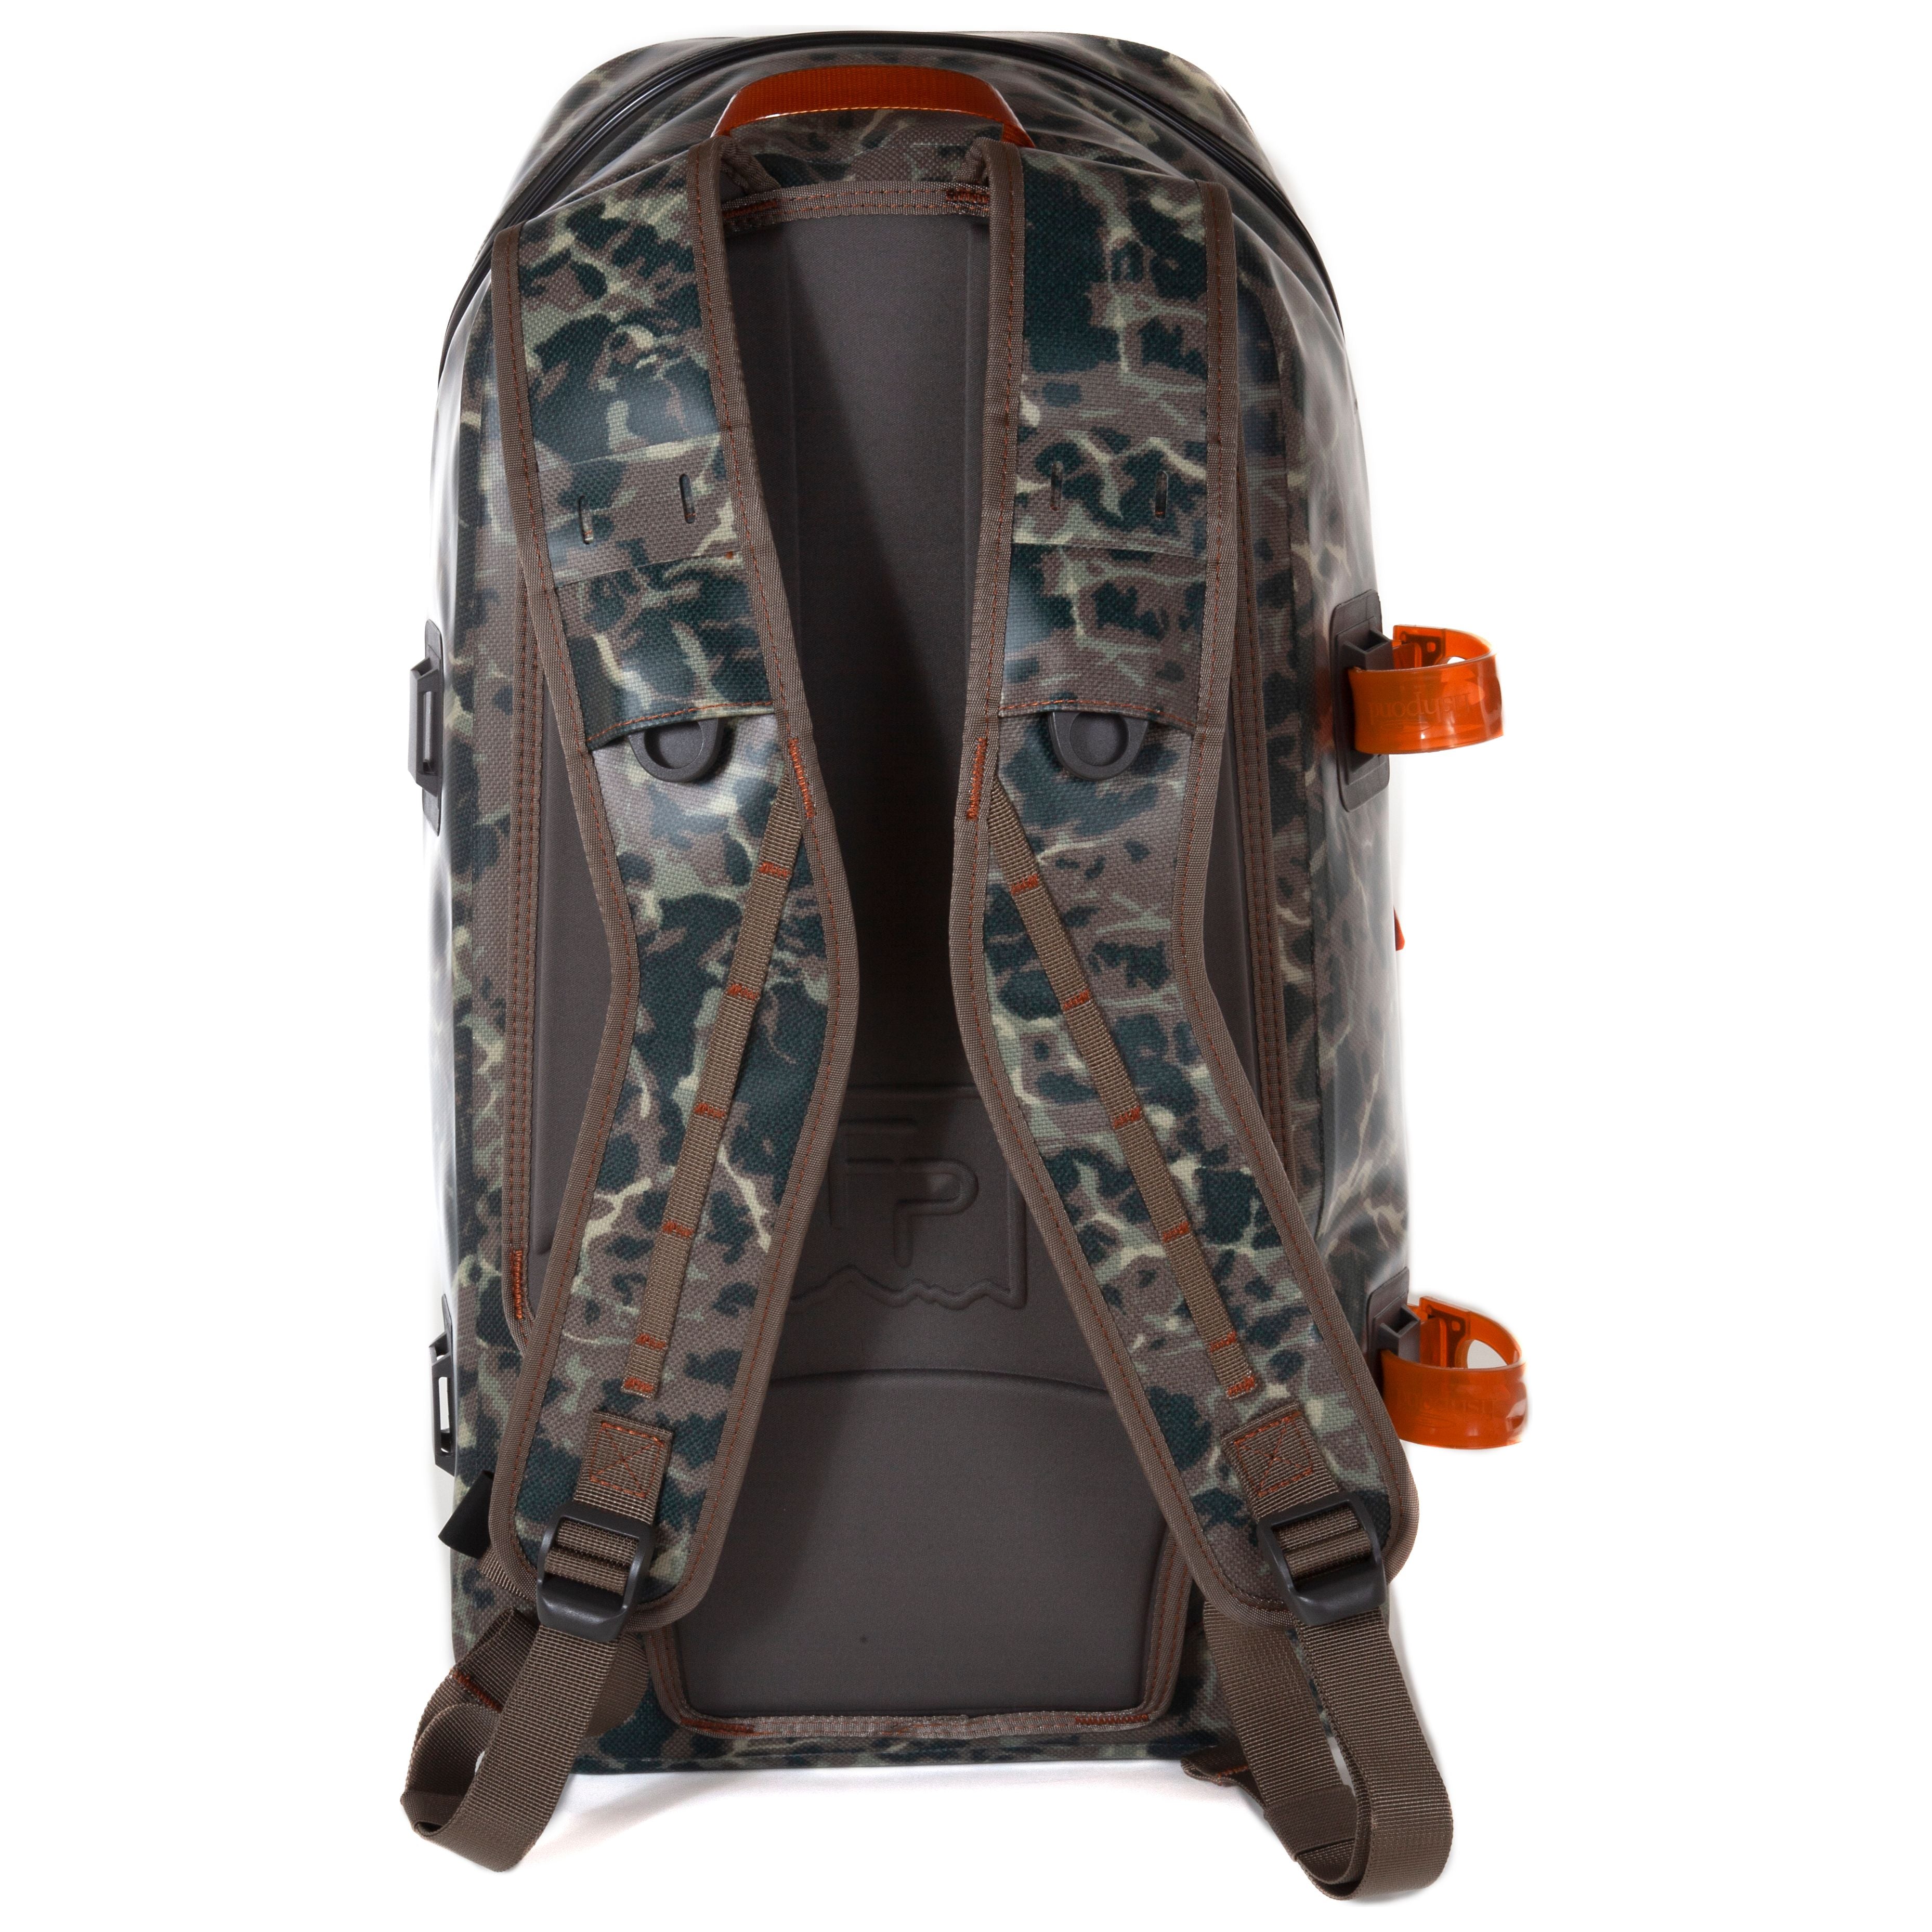 Fishpond Thunderhead Submersible Backpack Eco Riverbed Camo Image 03